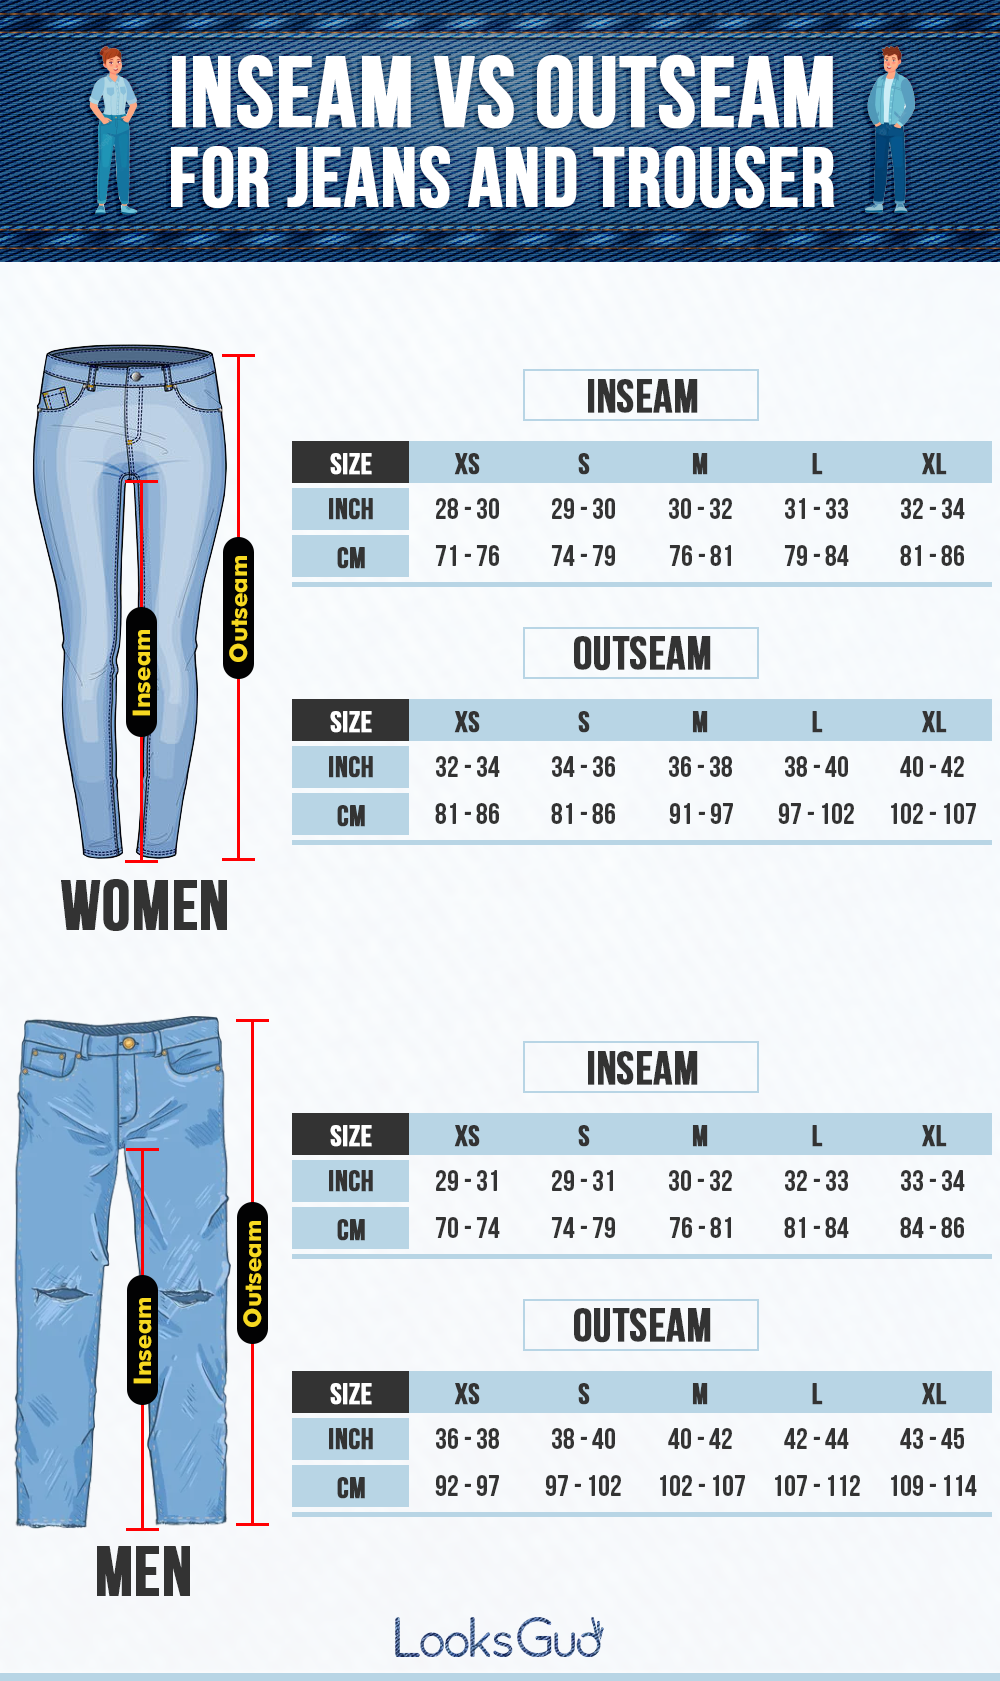 inseam vs outseam jeans and trouser length